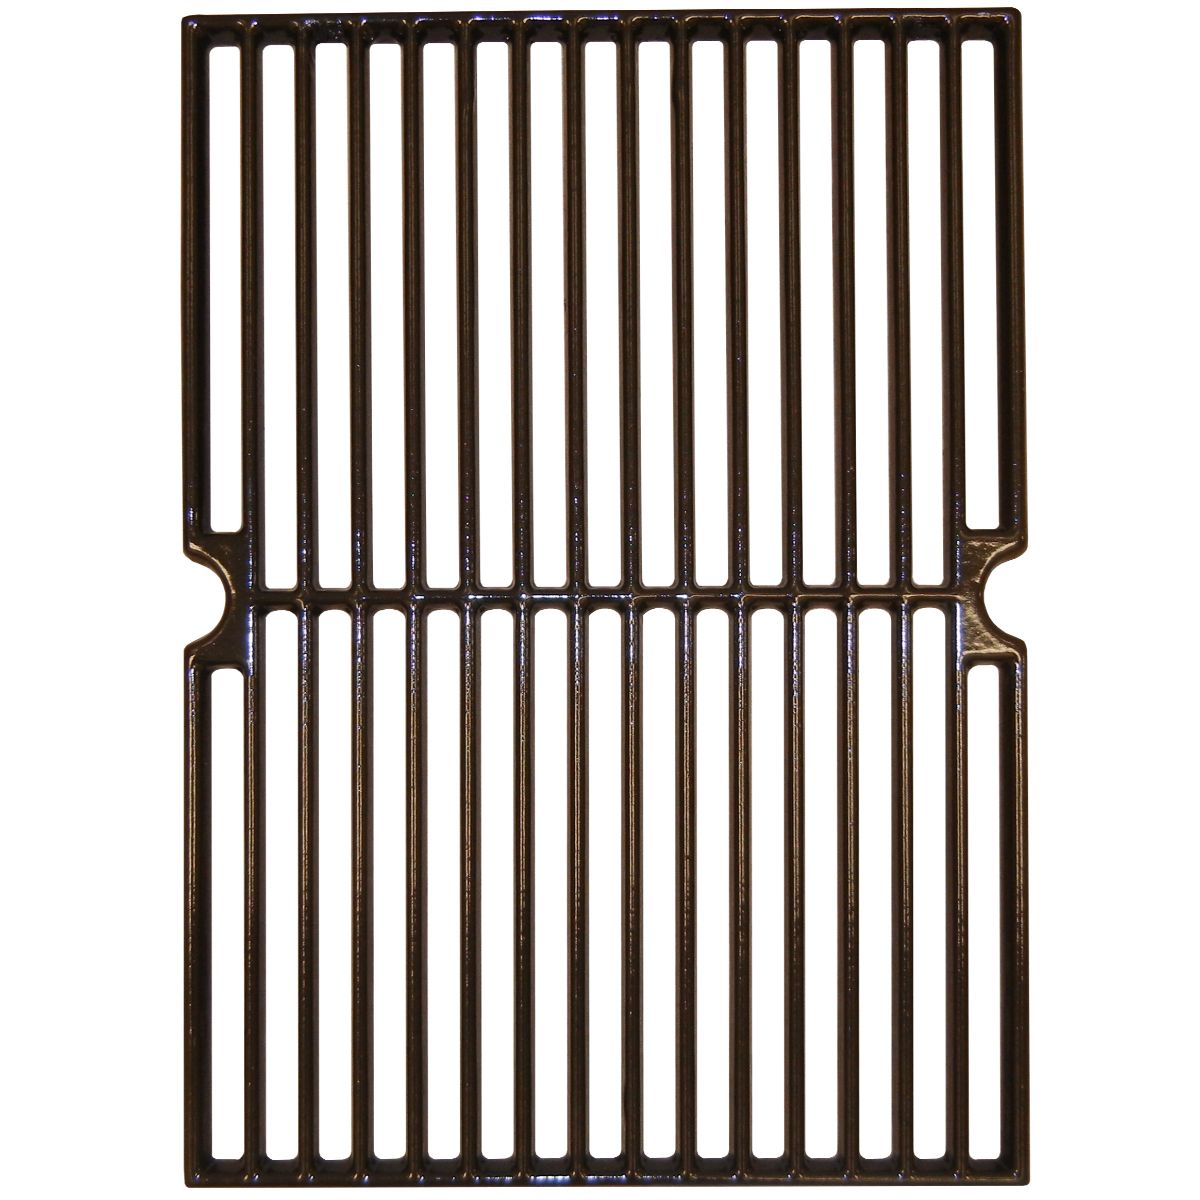 Gloss cast iron cooking grid for BBQ Tek, Four Seasons, Presidents Choice brand gas grills